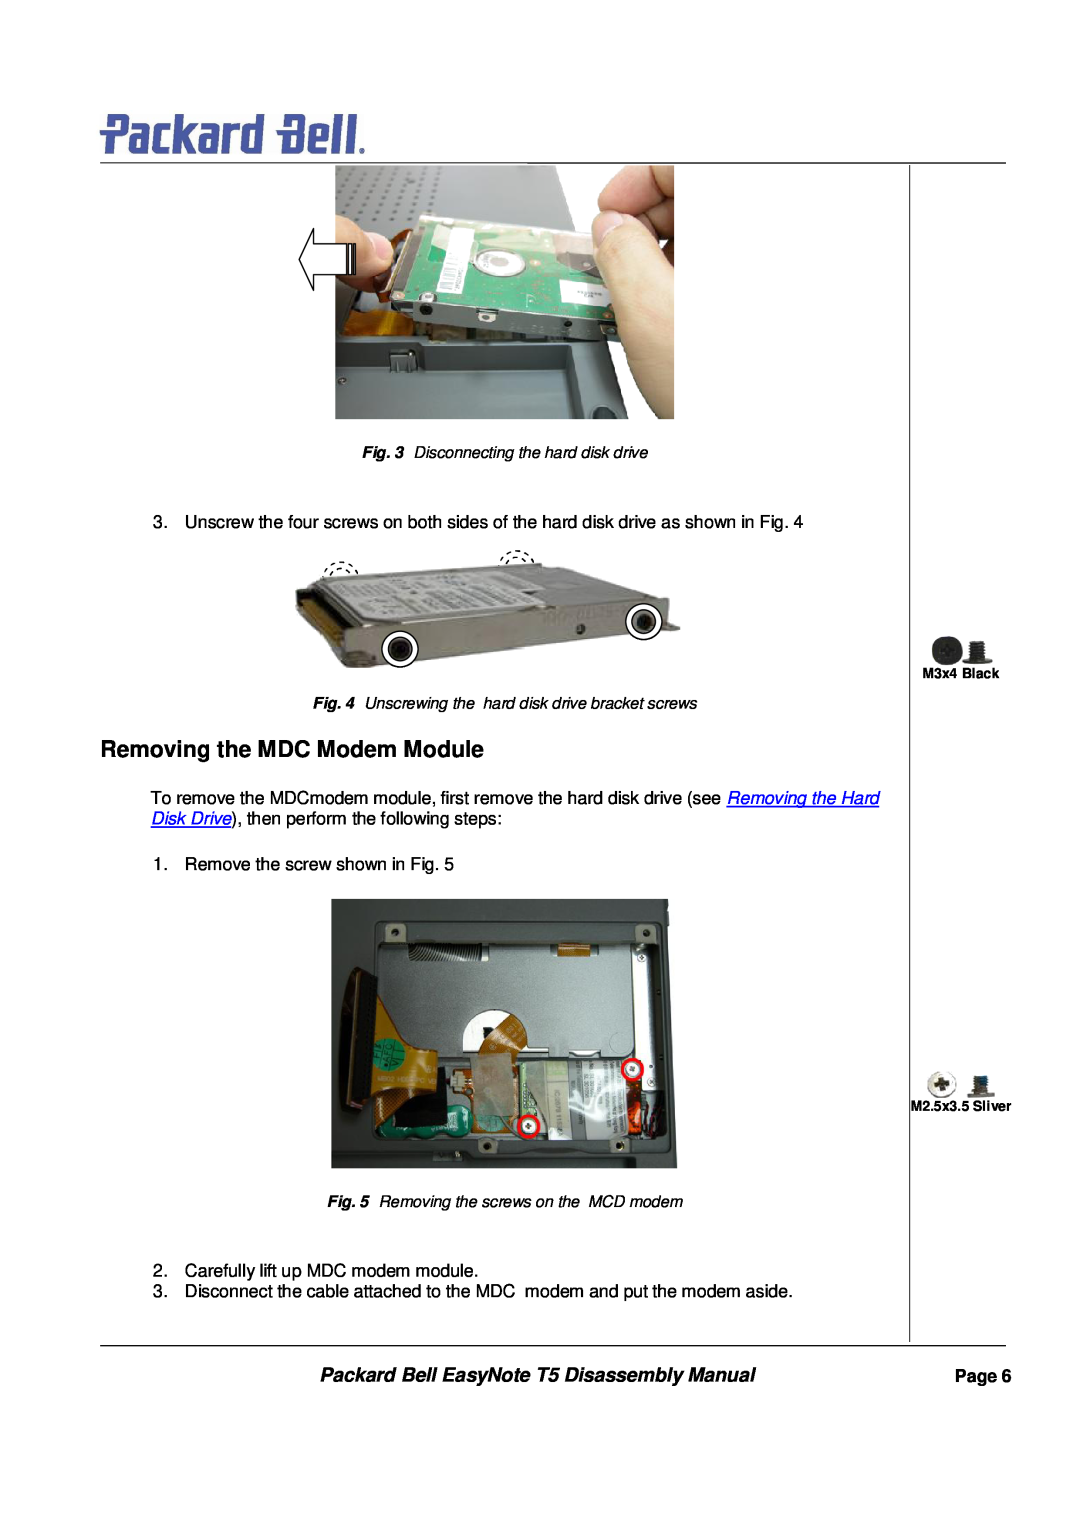 Packard Bell manual Removing the MDC Modem Module, Packard Bell EasyNote T5 Disassembly Manual 